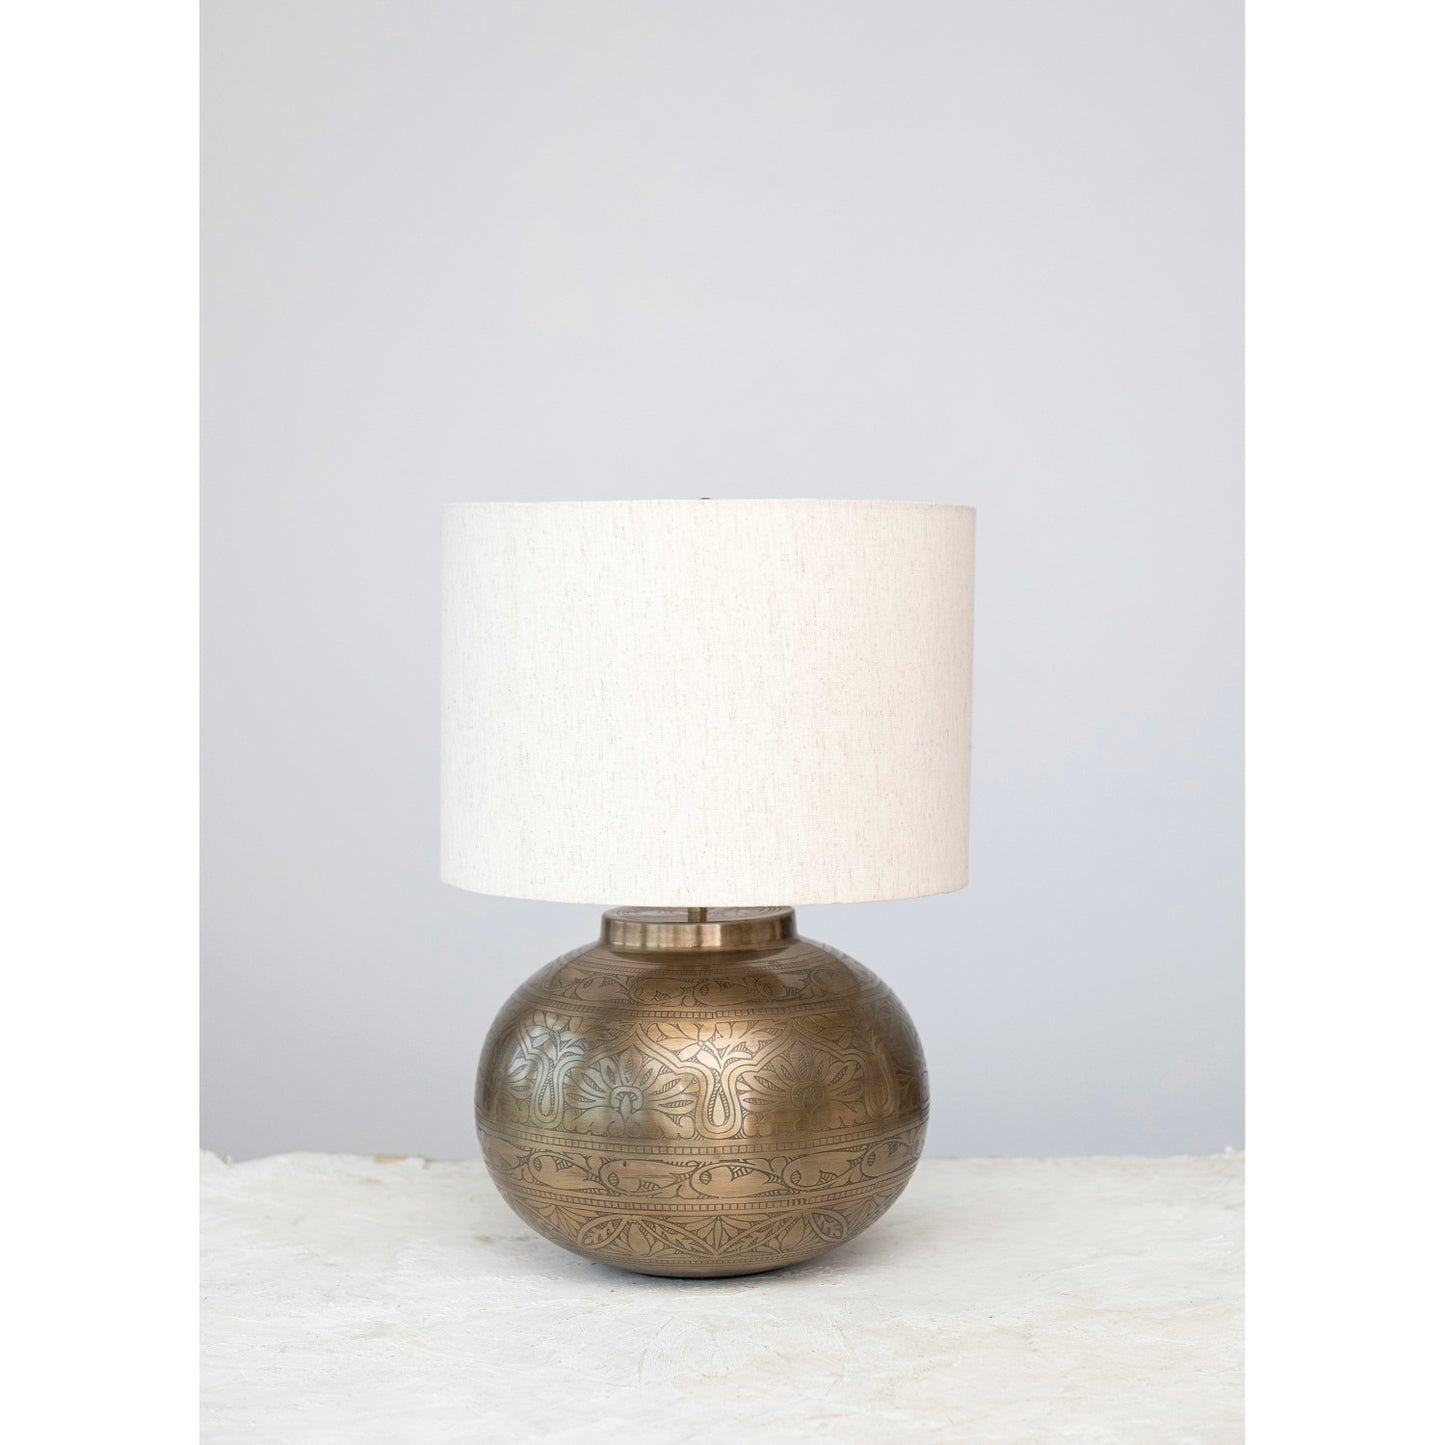 Etched Metal Table Lamp with Cotton Shade & Inline Switch